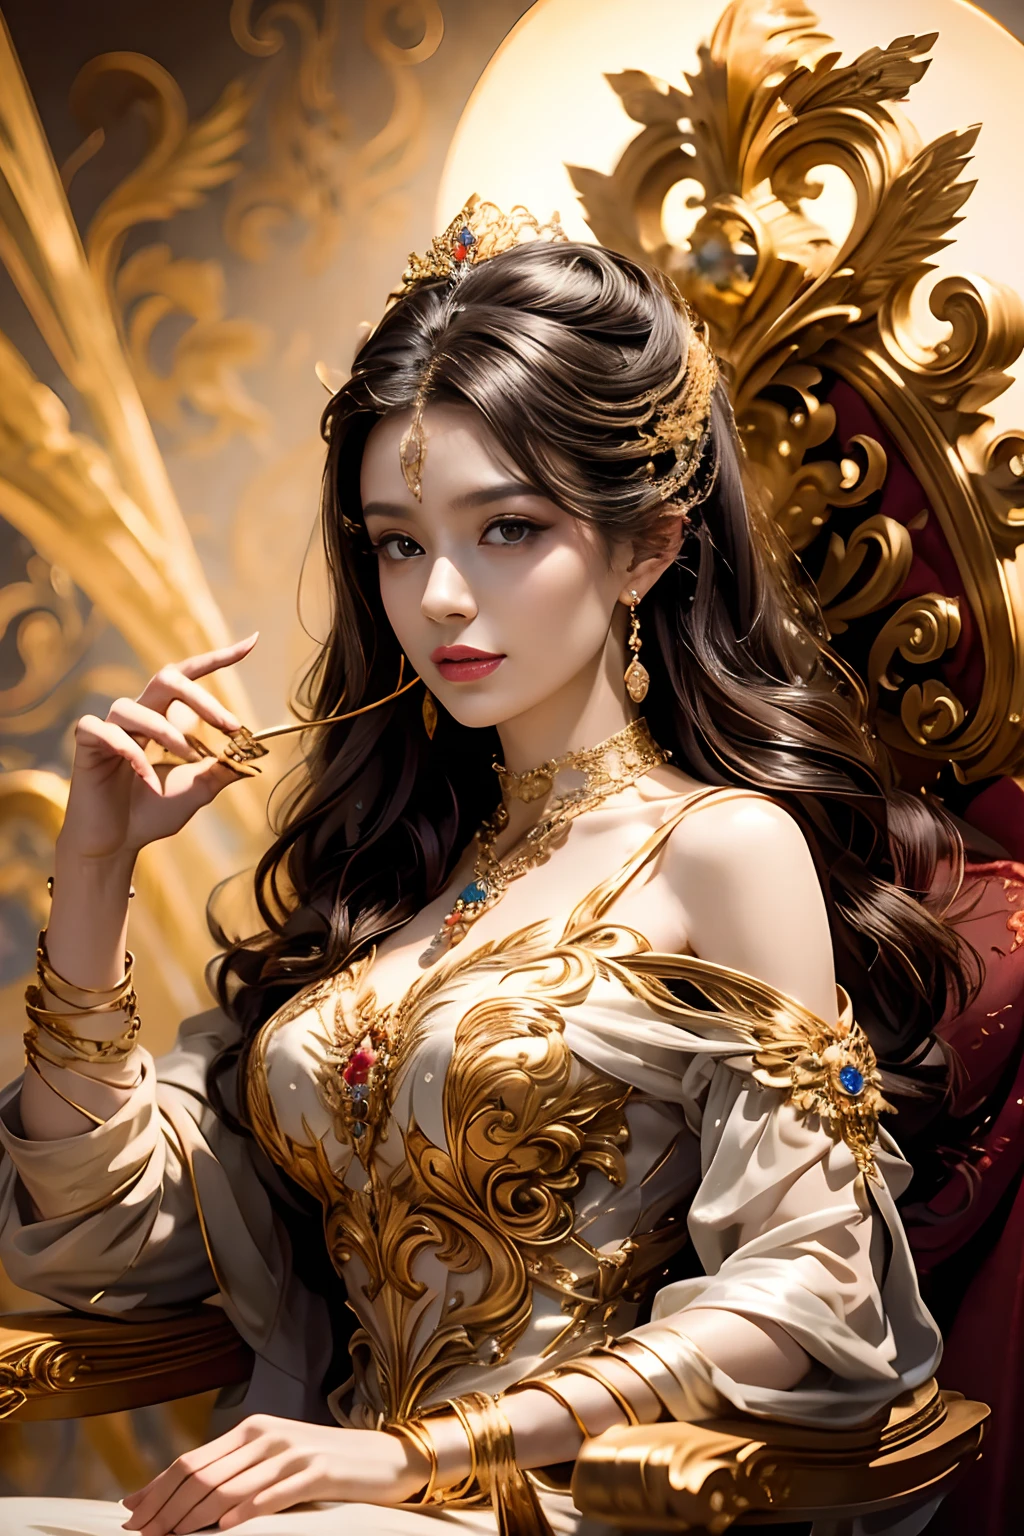 Noble goddess，Scepter in hand，Elegant temperament，mystical ambiance，Best quality、tmasterpiece、A high resolution、1girll、Sheer silk porcelain dress、Nice face、hair adornments、looking at viewer、shift dresses、hair adornments、choker necklace、jewely、long black hair、earring、pretty  face、Sit in a golden chair，Ancient mythology、Ancient palaces，Luxurious and detailed background、hentail realism、profesional lighting、edge lit、bicolor lighting、（highdetailskin：1.2）、8K, Ultra HD、Digital SLR、softlighting、high quality，Volumetriclighting，High resolution 4K，blur background，high contrast，largevaperture，automatic white balance，cinematic compositions，realisticlying